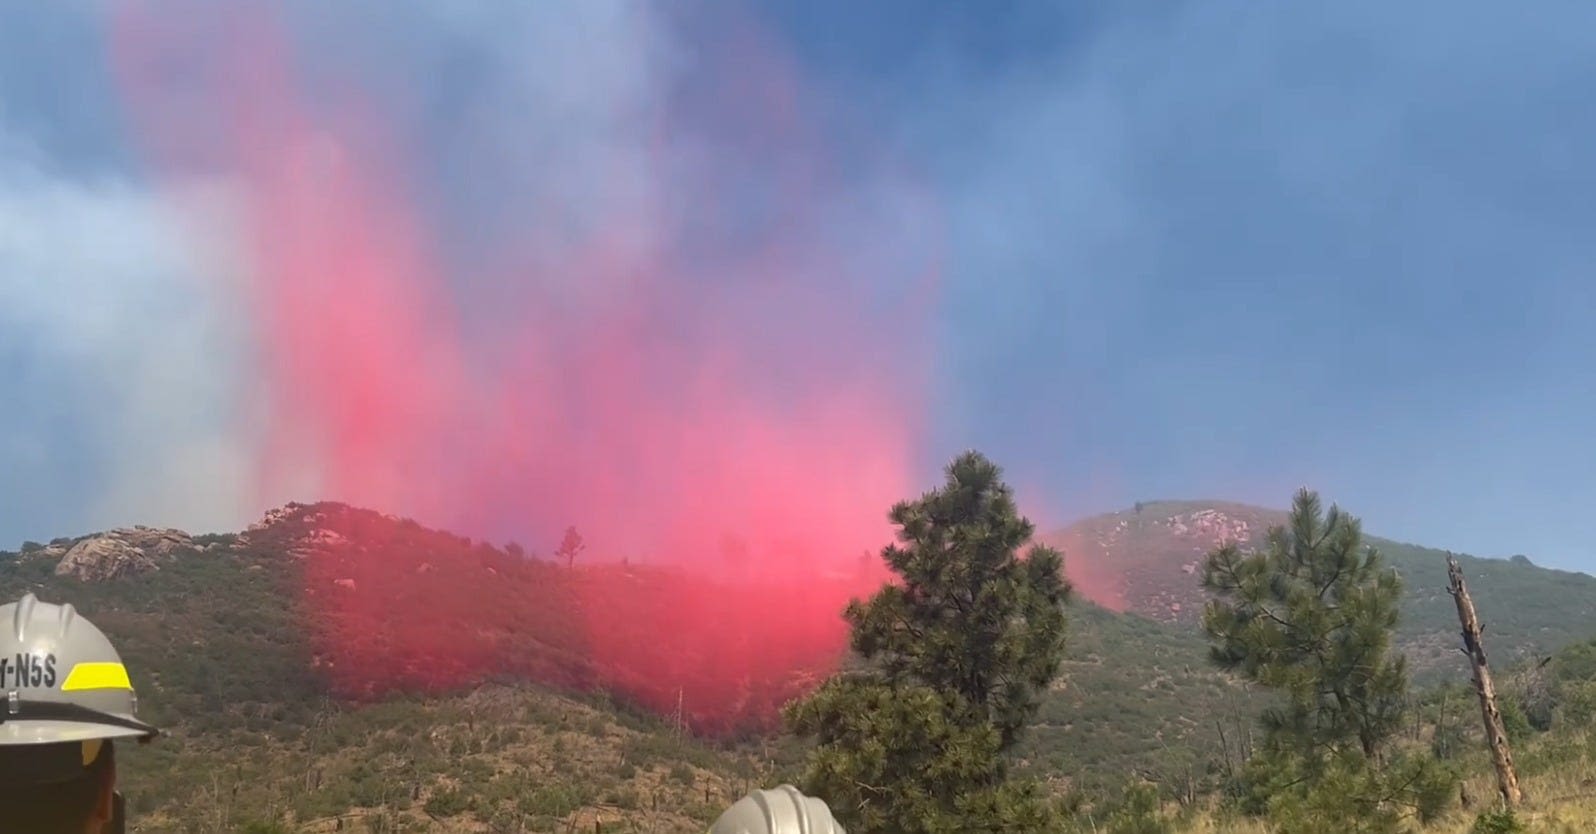 Blue 2 Fire continues burning near Ruidoso, NM. Track the wildfire in real-time